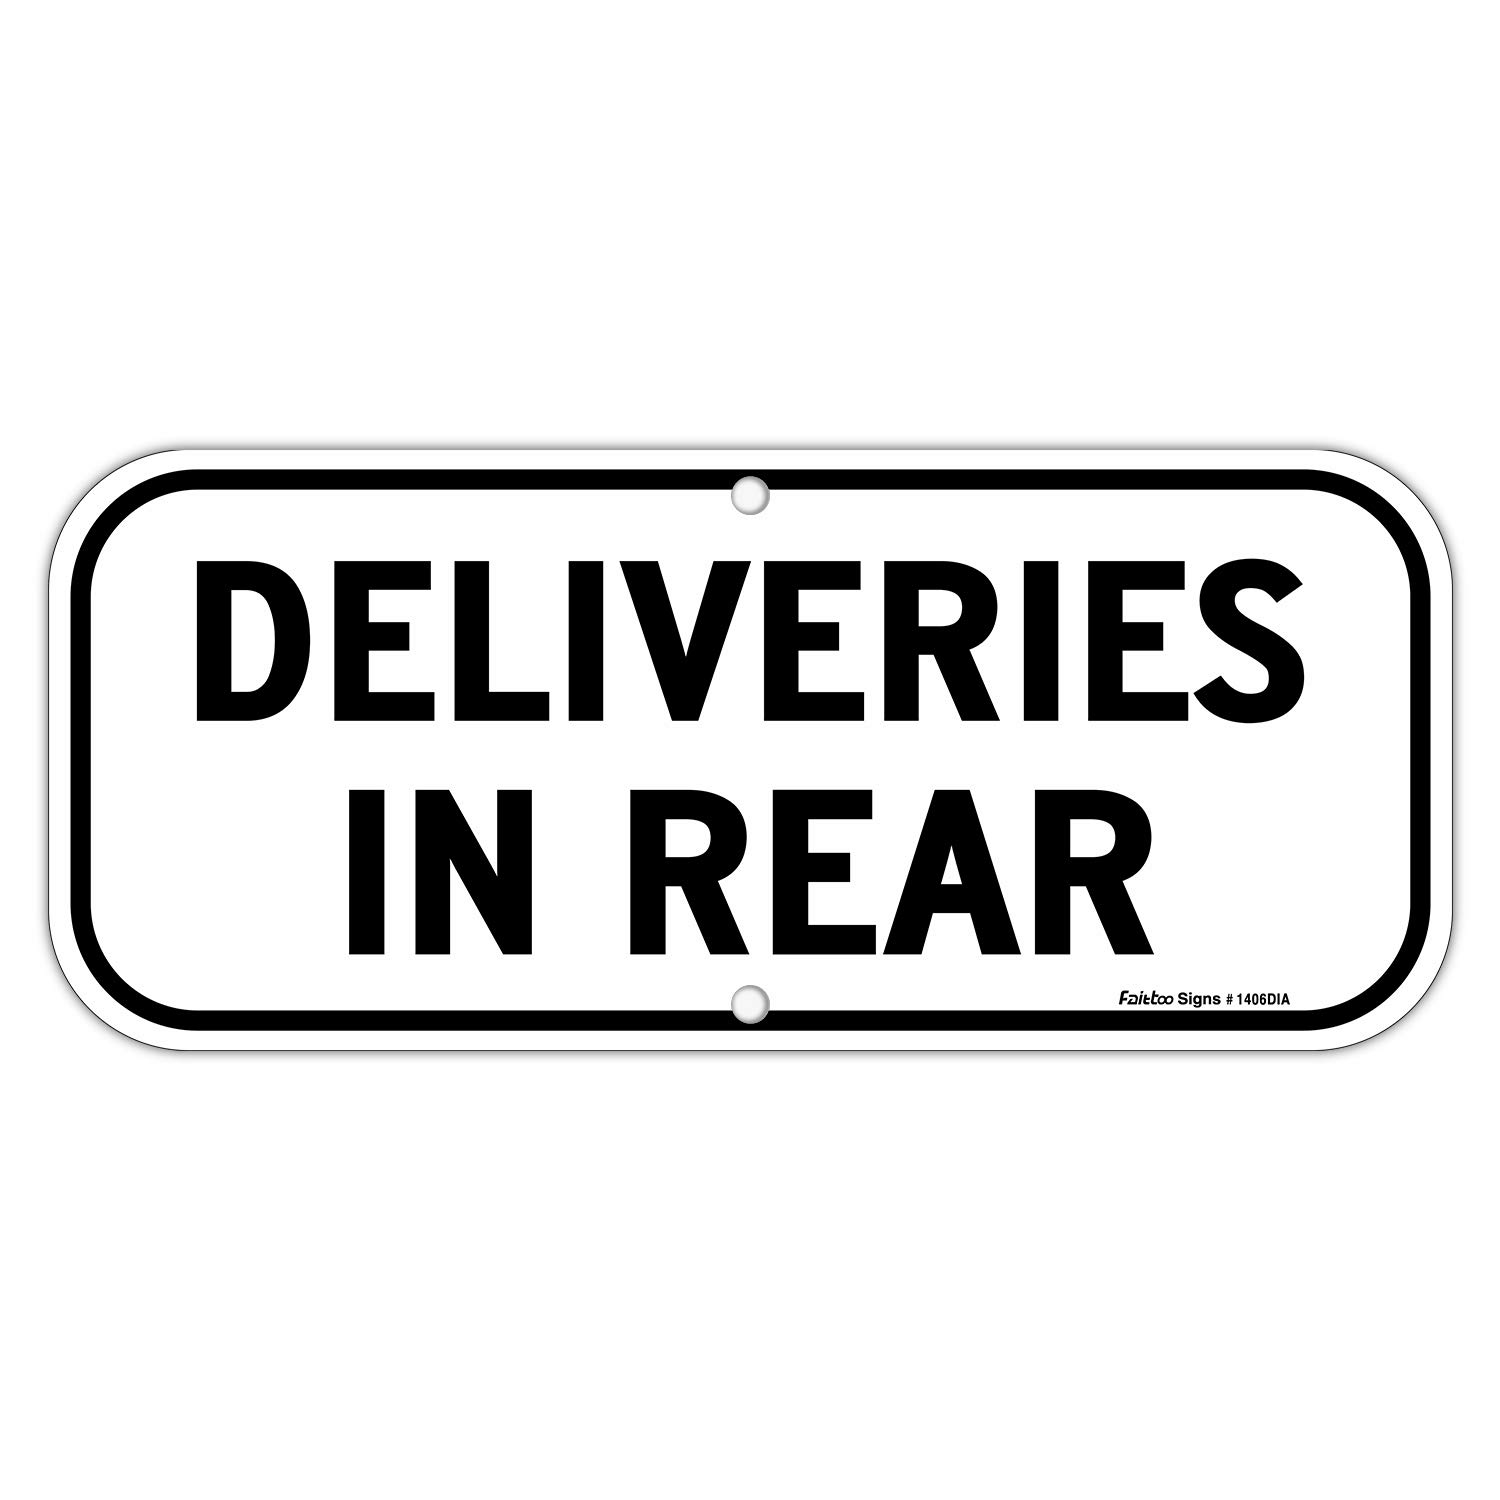 Deliveries in Rear Sign,14x6 Inches Rectangle Rust Free Aluminum Metal Sign,Weather/Fade Resistant,Easy to Mount, Black on White,Indoor/Outdoor Use